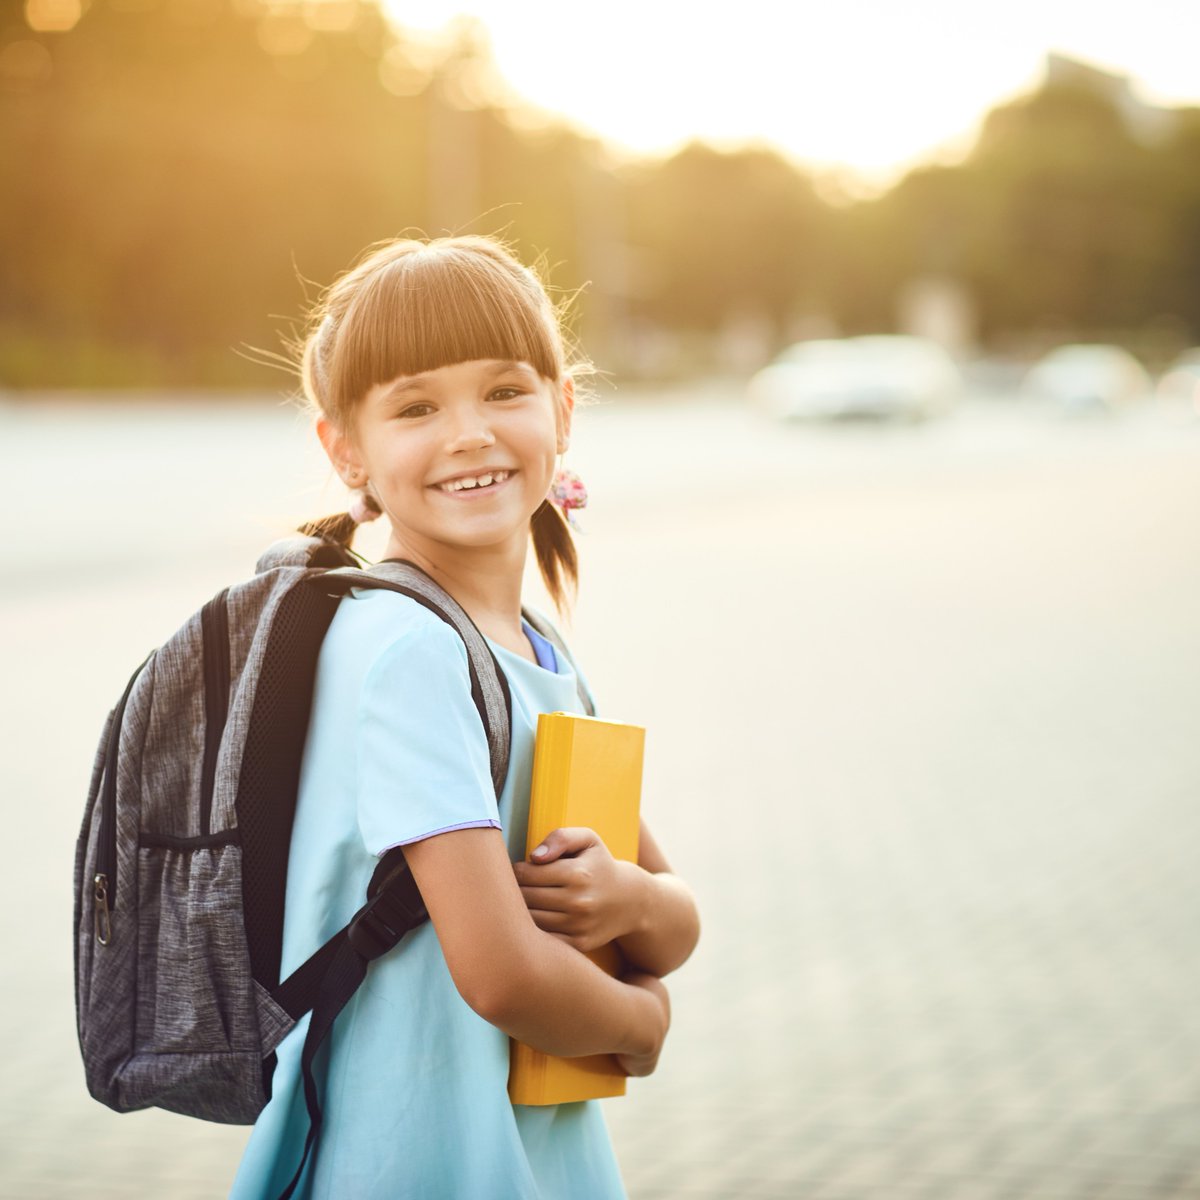 As the new school year approaches, here's a golden opportunity for a fresh start - not just in the classroom, but with your insurance too! 🏫✅ It's important to make sure your coverage still aligns.

#BackToSchool #FreshStart #InsuranceReview #ProtectWhatMatters